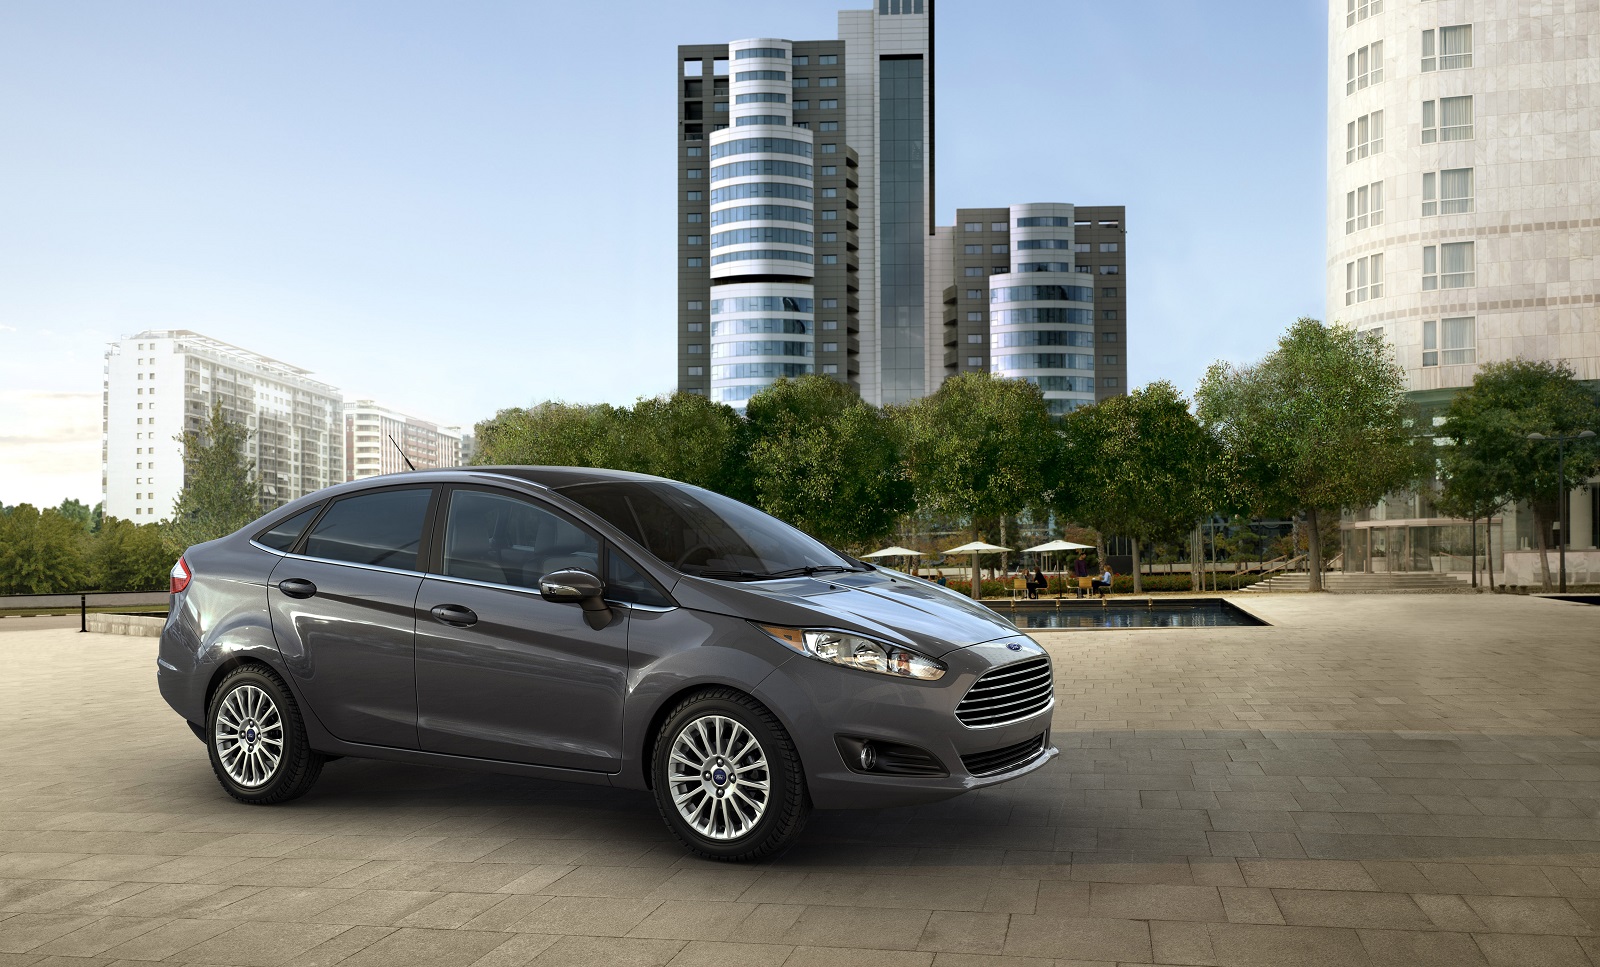 2016 Ford Fiesta Review, Ratings, Specs, Prices, and Photos - The Connection